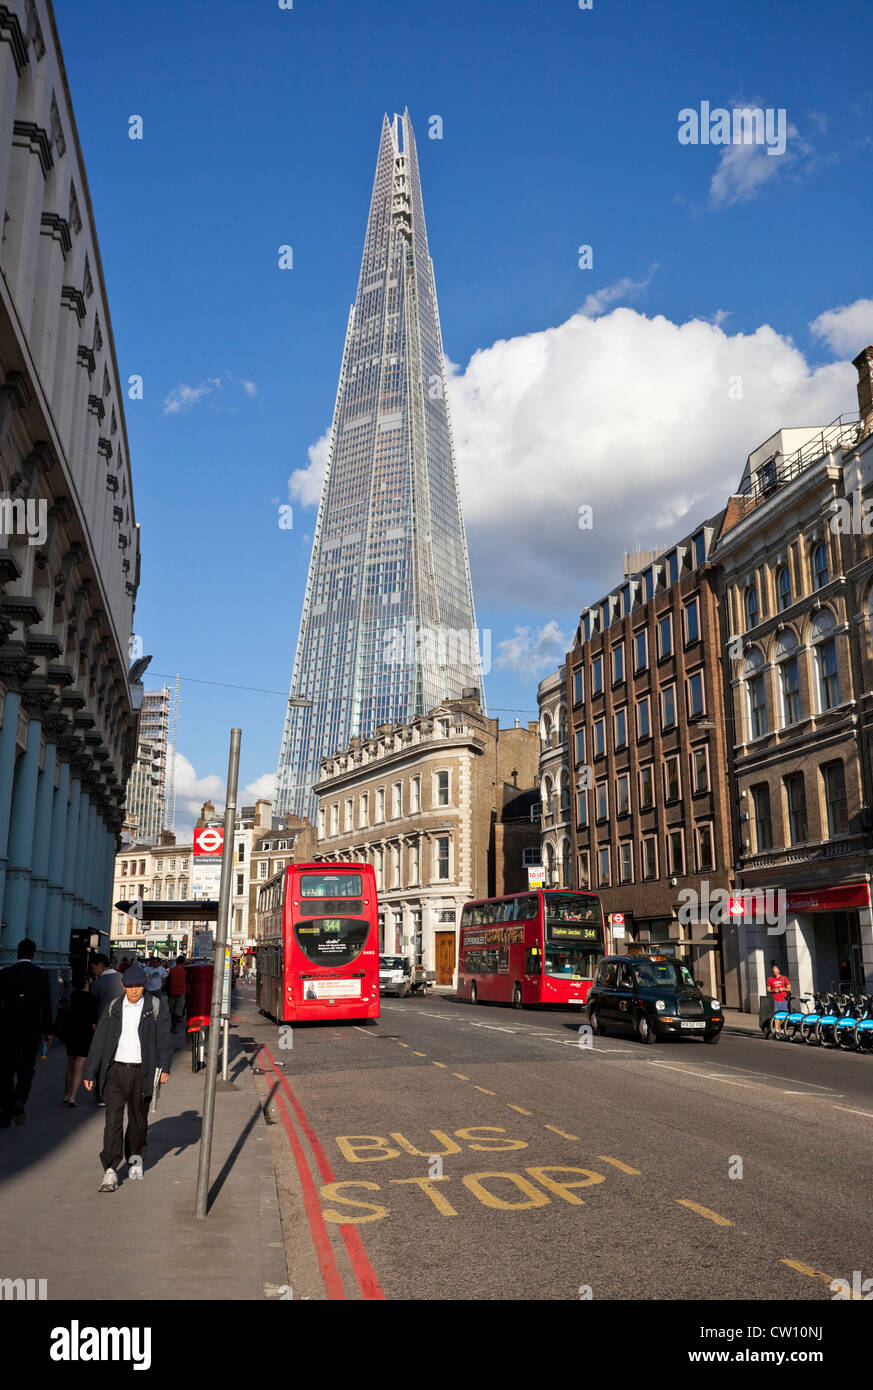 Street Scene On Southwark Street With The Shard Building In The